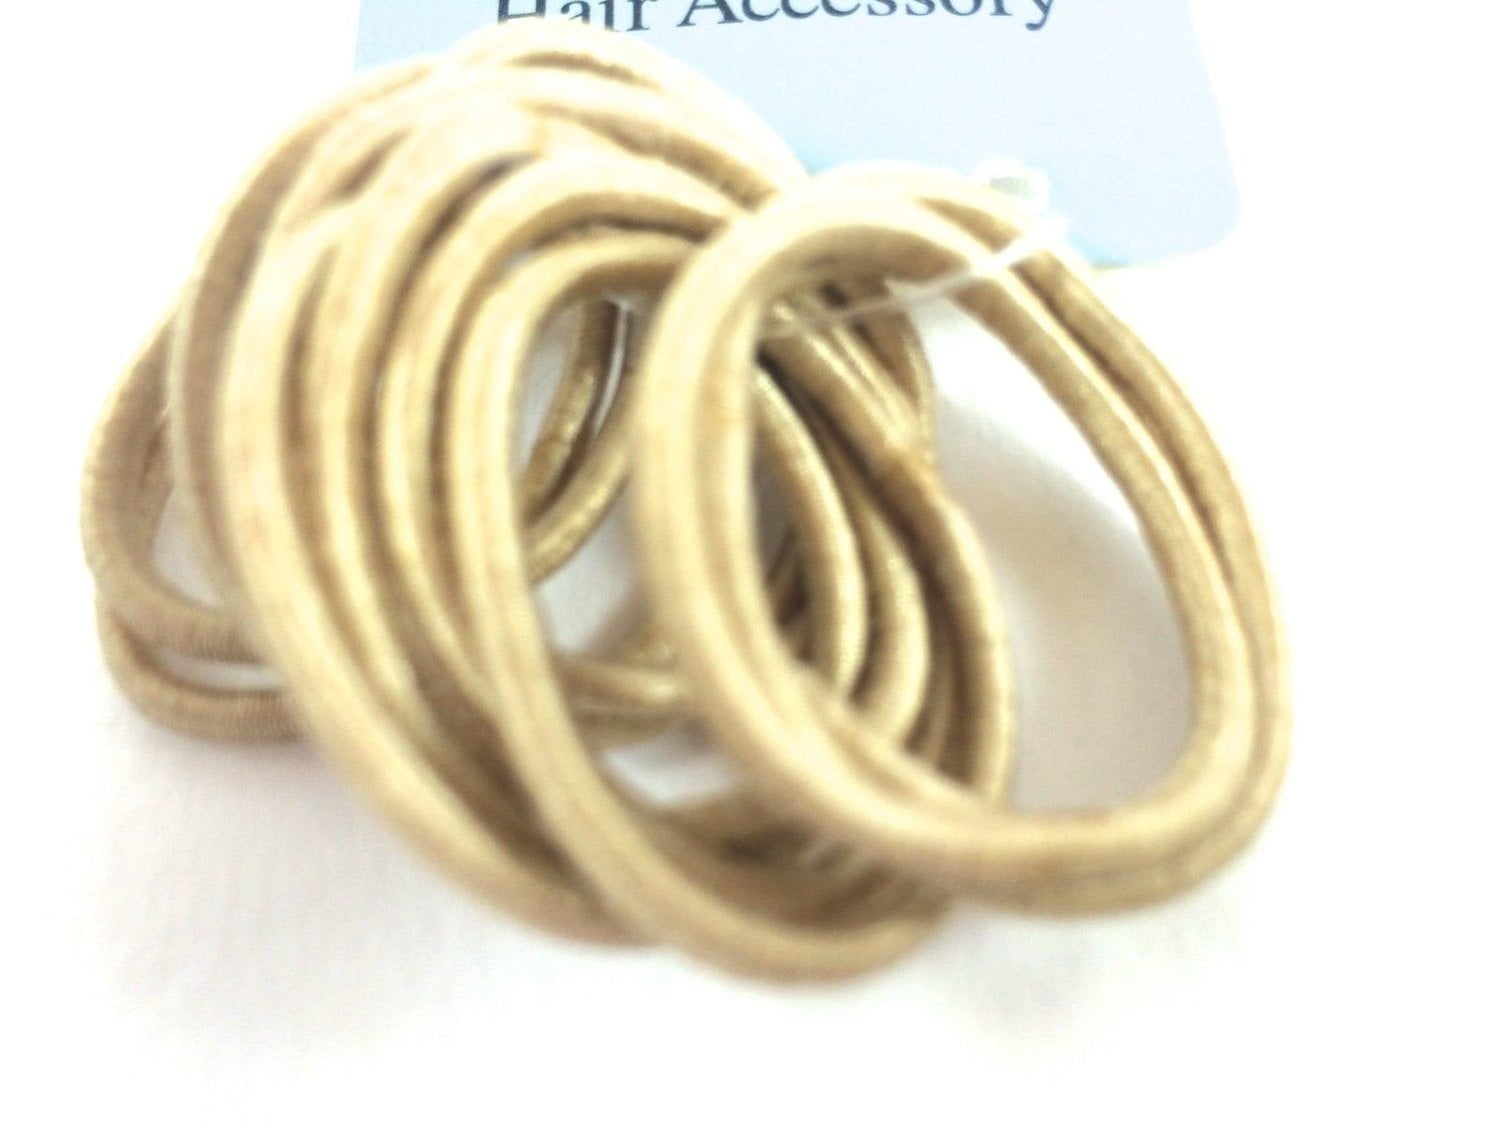 Blonde hair elastics in a pack of 12. Small, thin snag free bobbles.